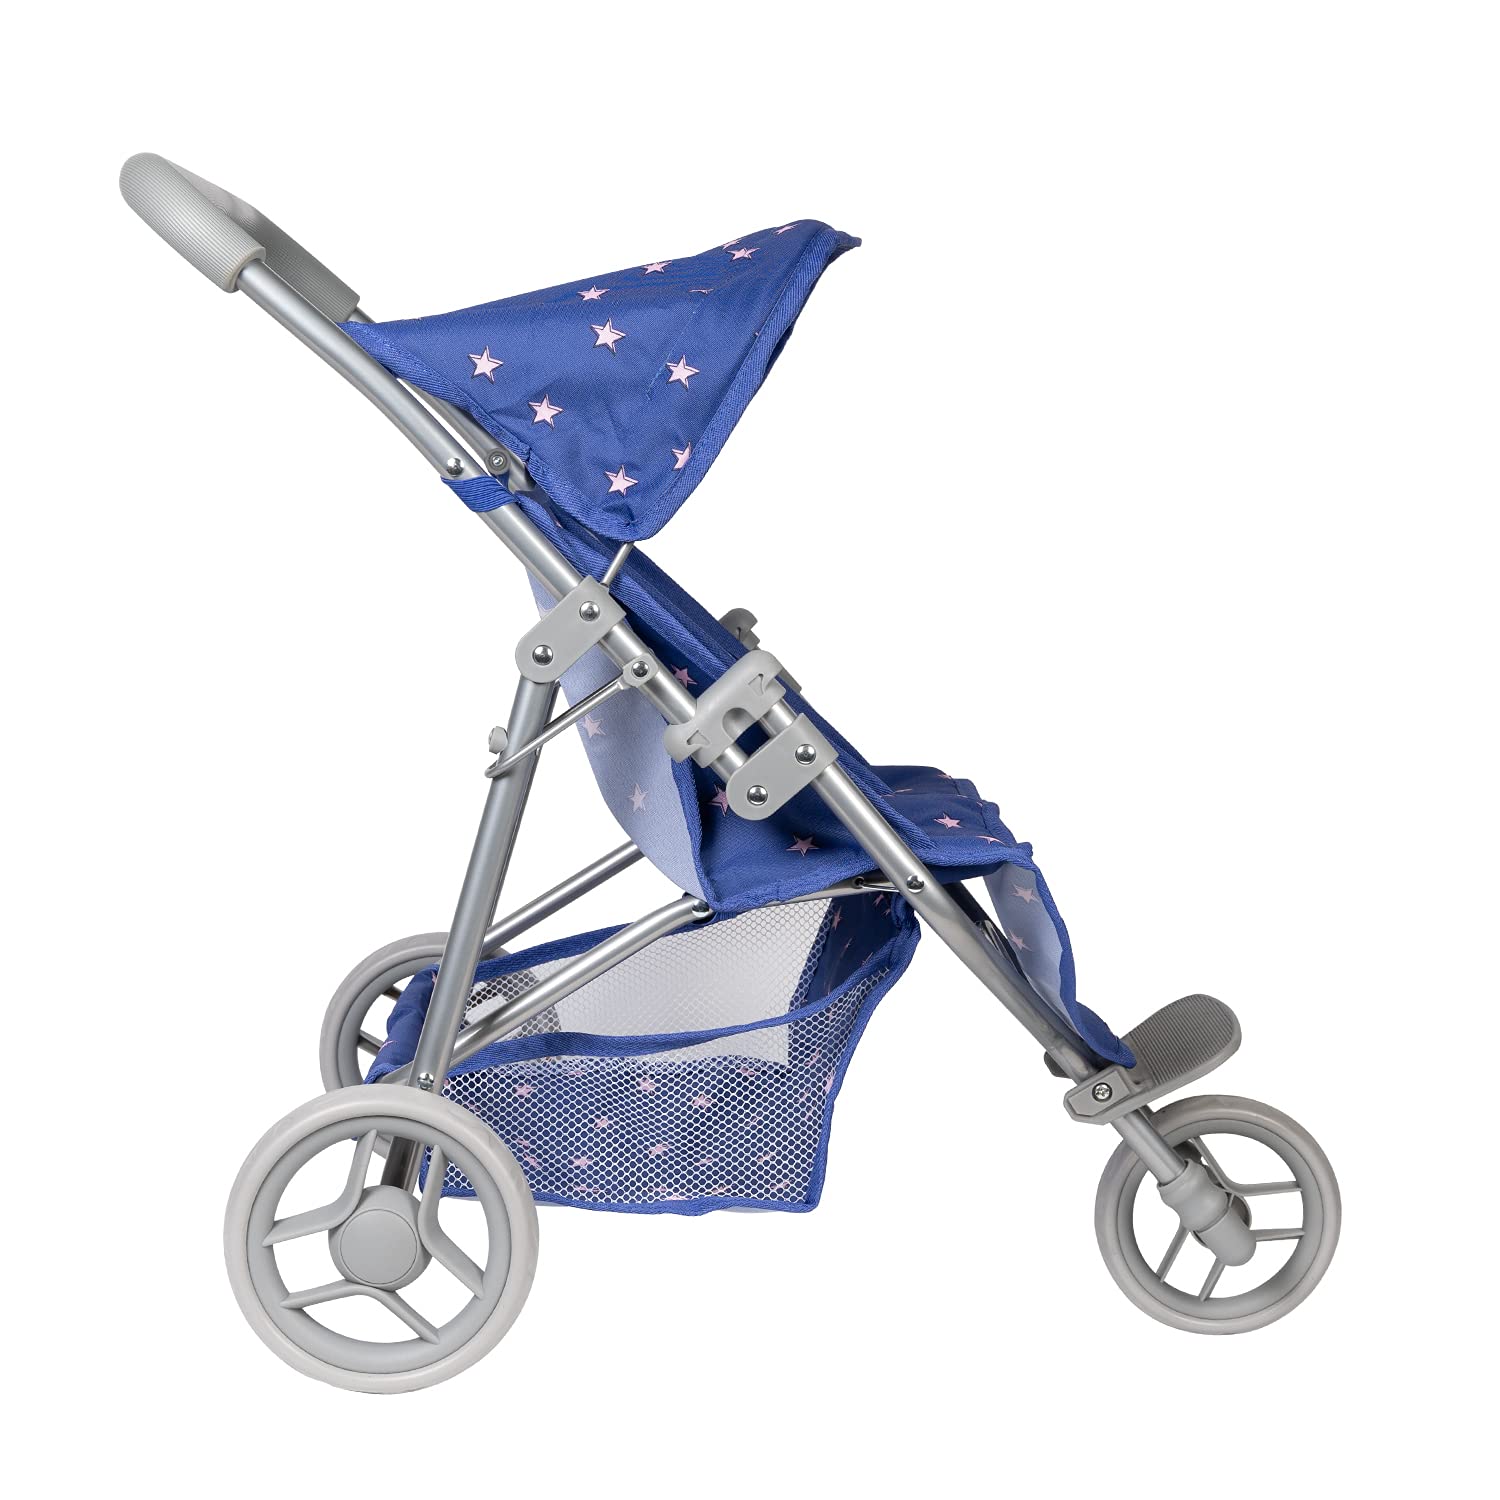 ADORA Baby Doll Stroller, Starry Night Stroller Twin Jogger Stroller, Fits Dolls Up to 16 inches